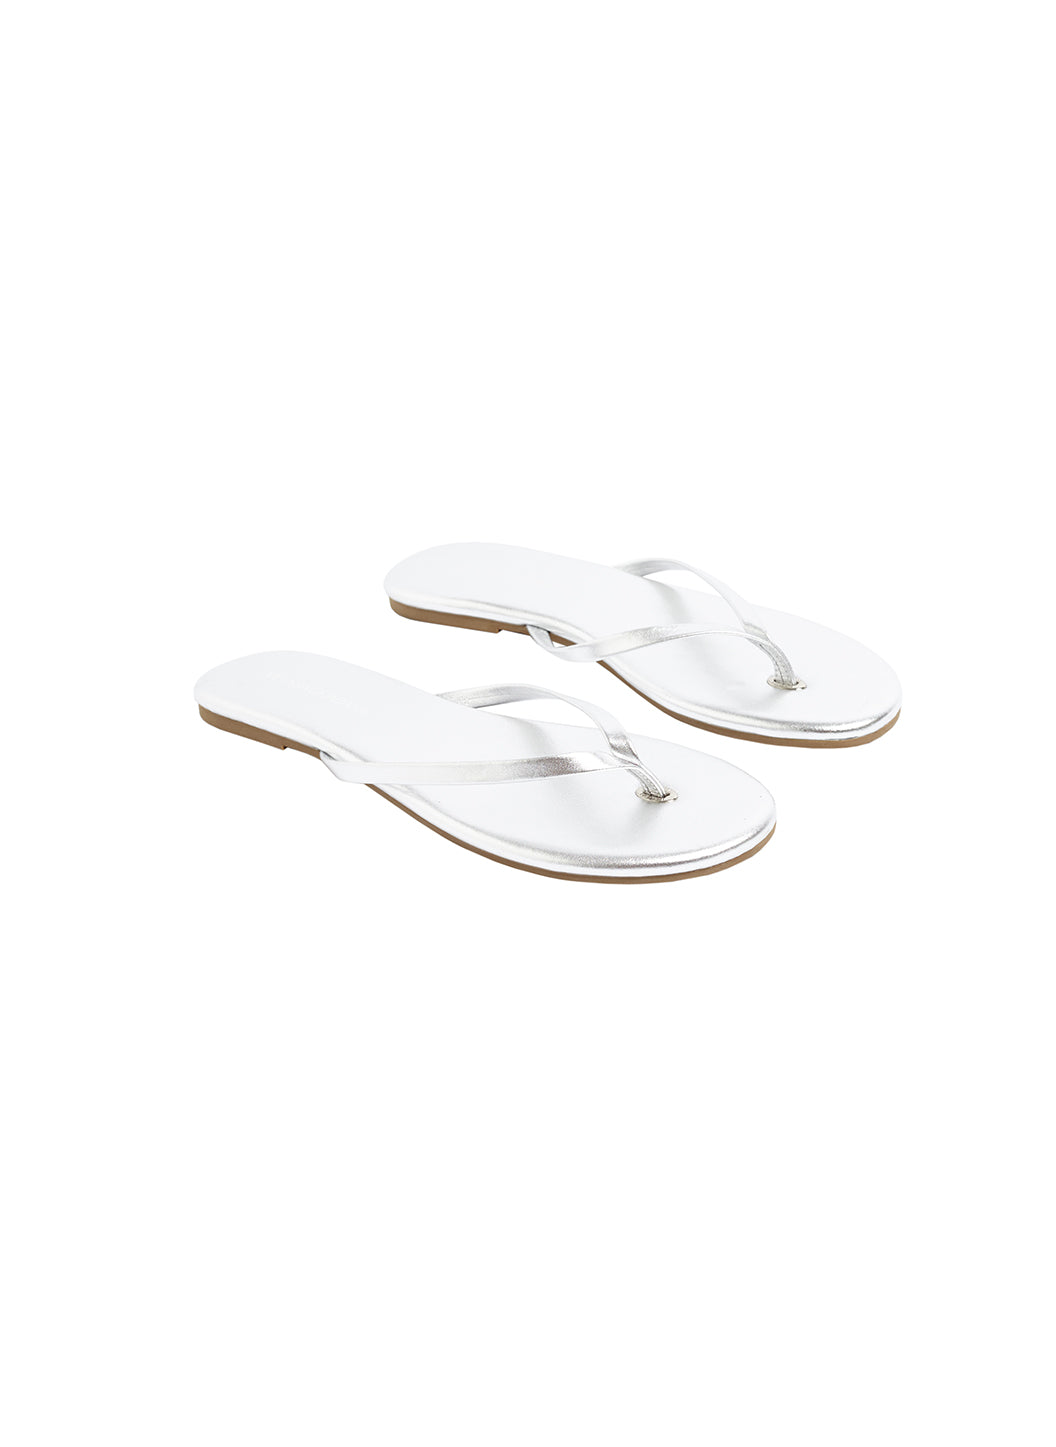 ASOS DESIGN Wide Fit Florence leather flip flop sandals in white